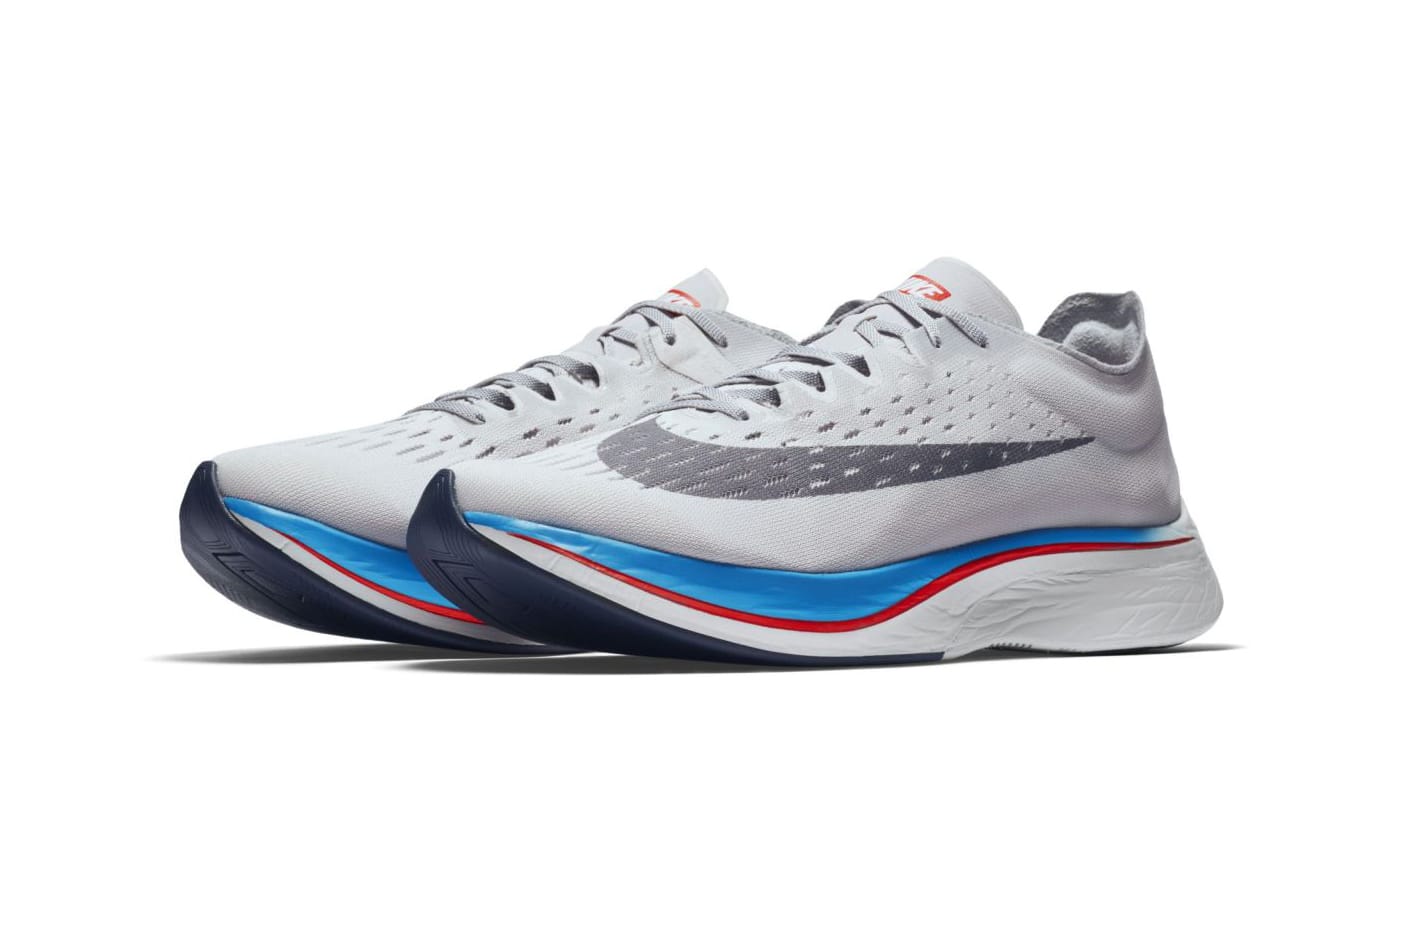 vaporfly 4 new color